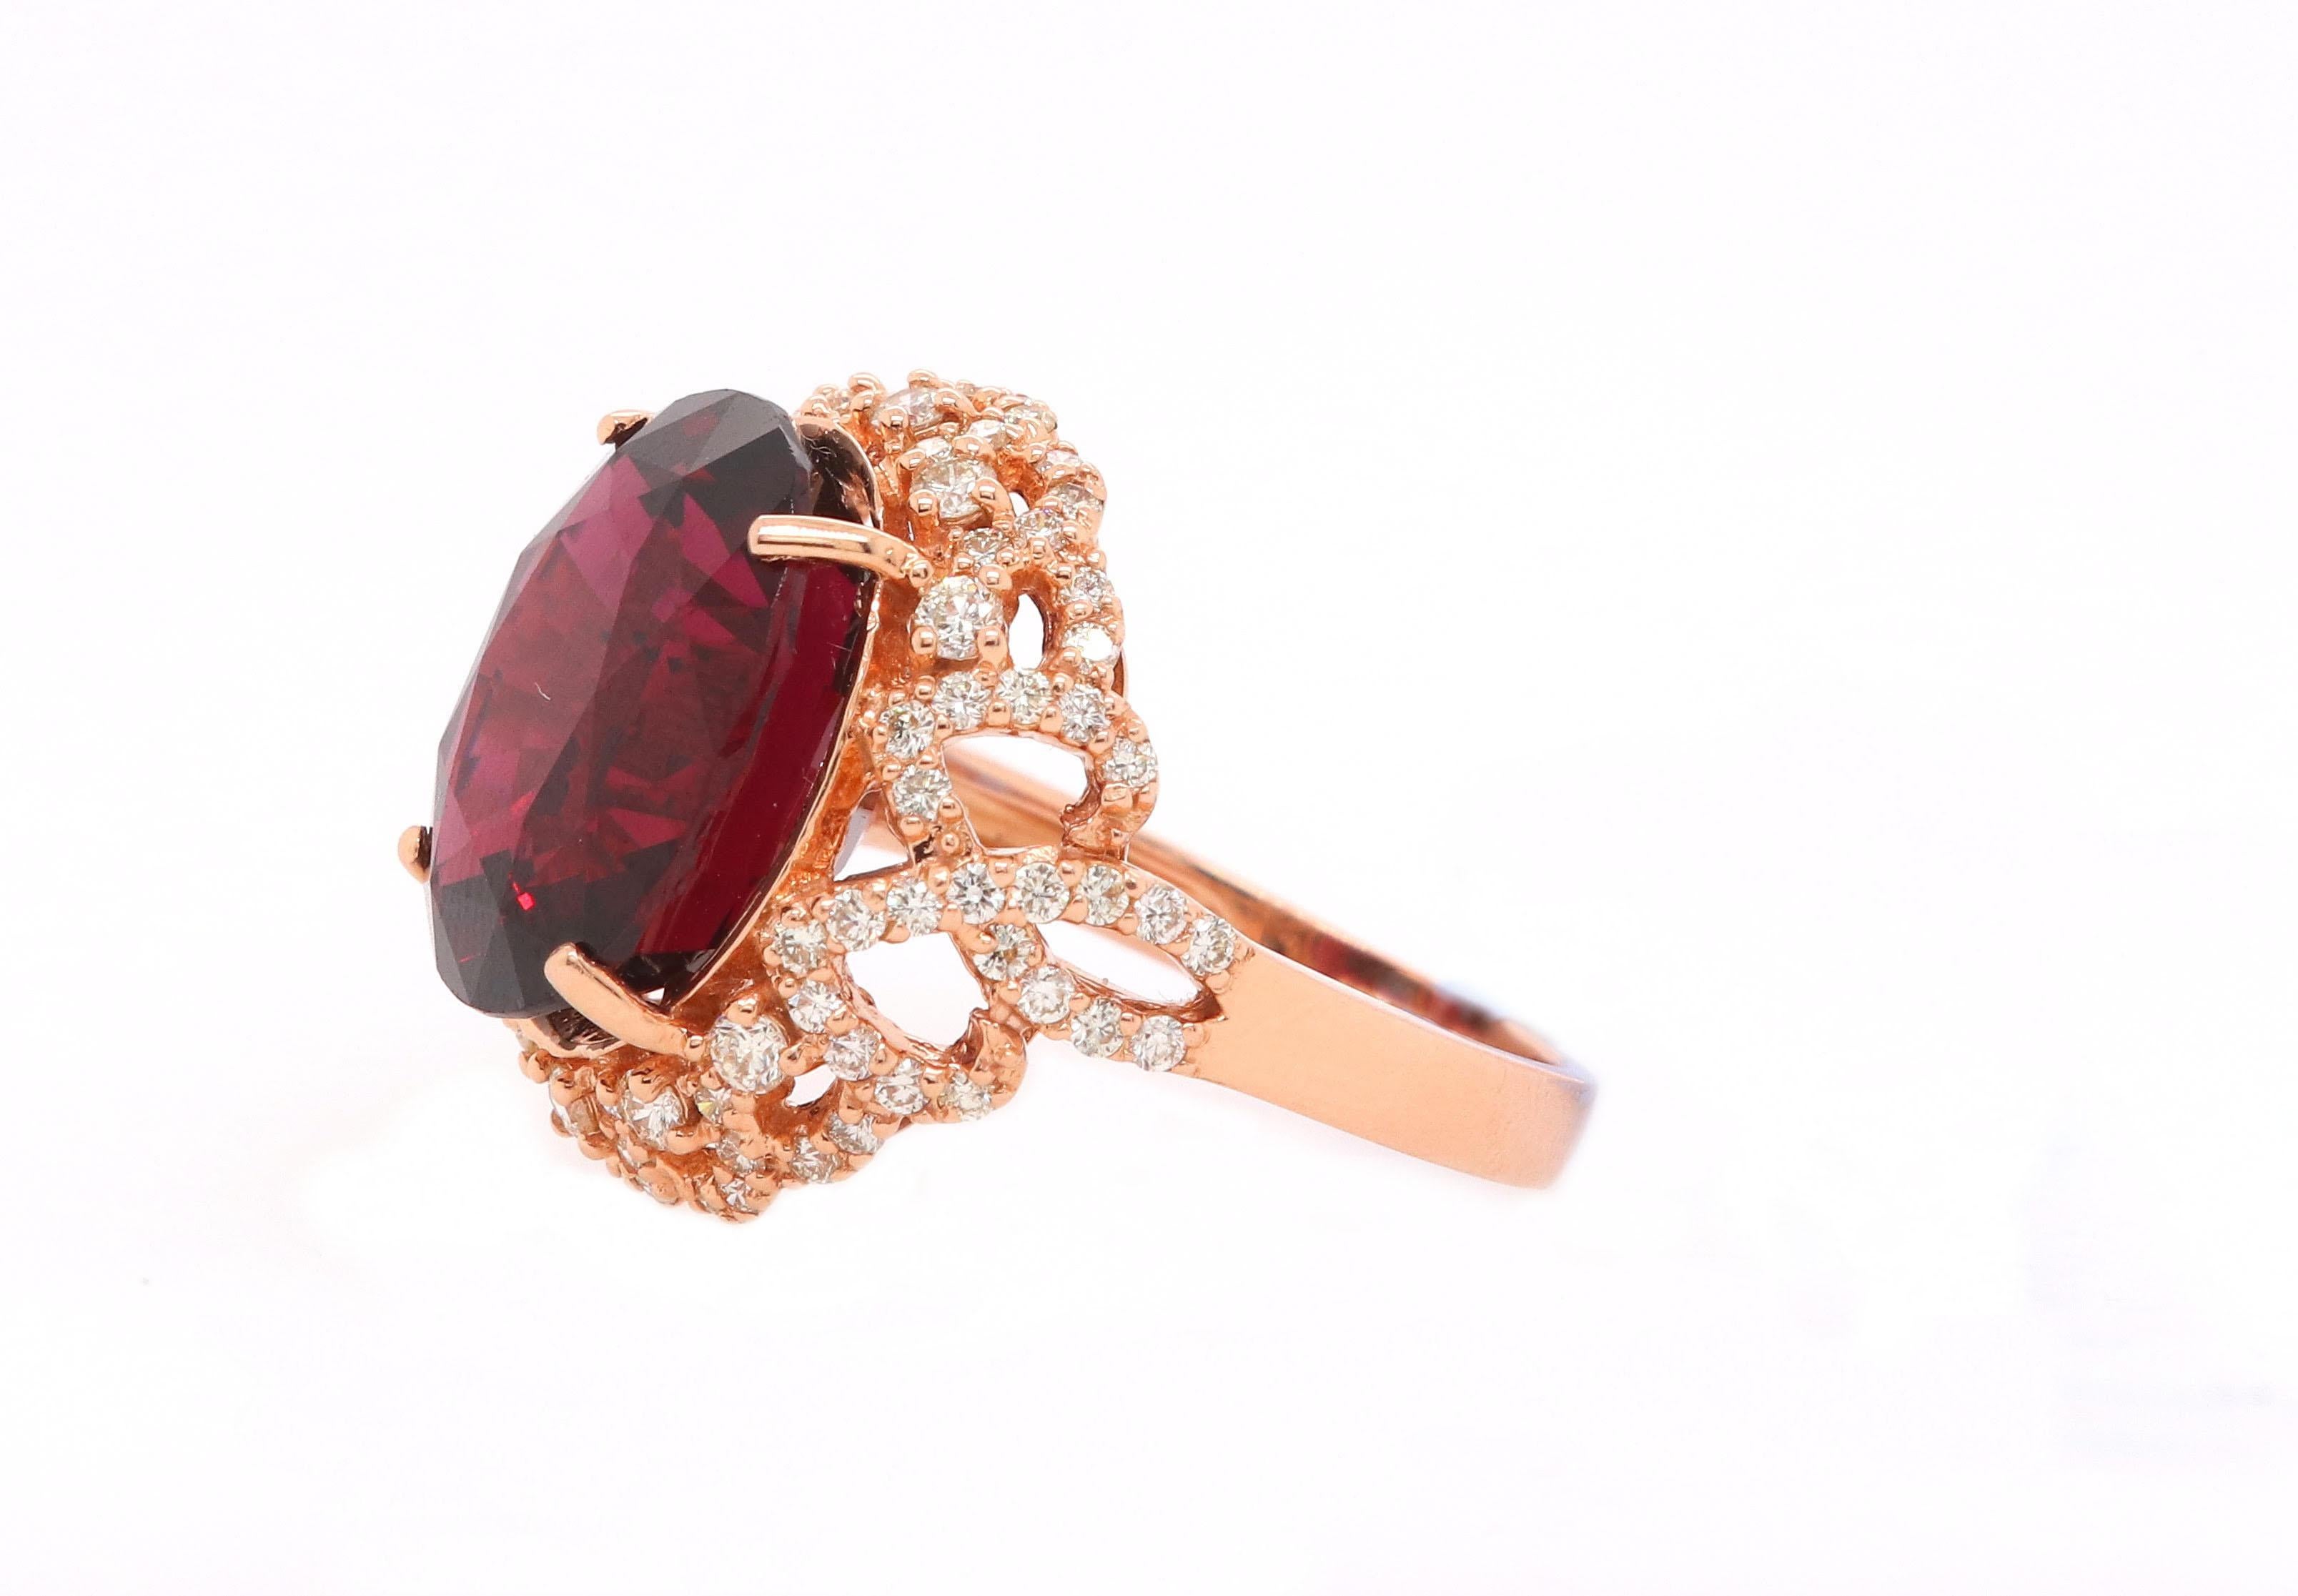 Material: 14k Rose Gold 
Center Stone Details: 1 Oval Rubellite at 13.41 Carats  - 15.4 x 12.1 mm
Mounting Diamond Details: 92 Round White Diamonds Approximately 0.97 Carats - Clarity: SI / Color: H-I
Ring Size: Size 6.5. Alberto offers